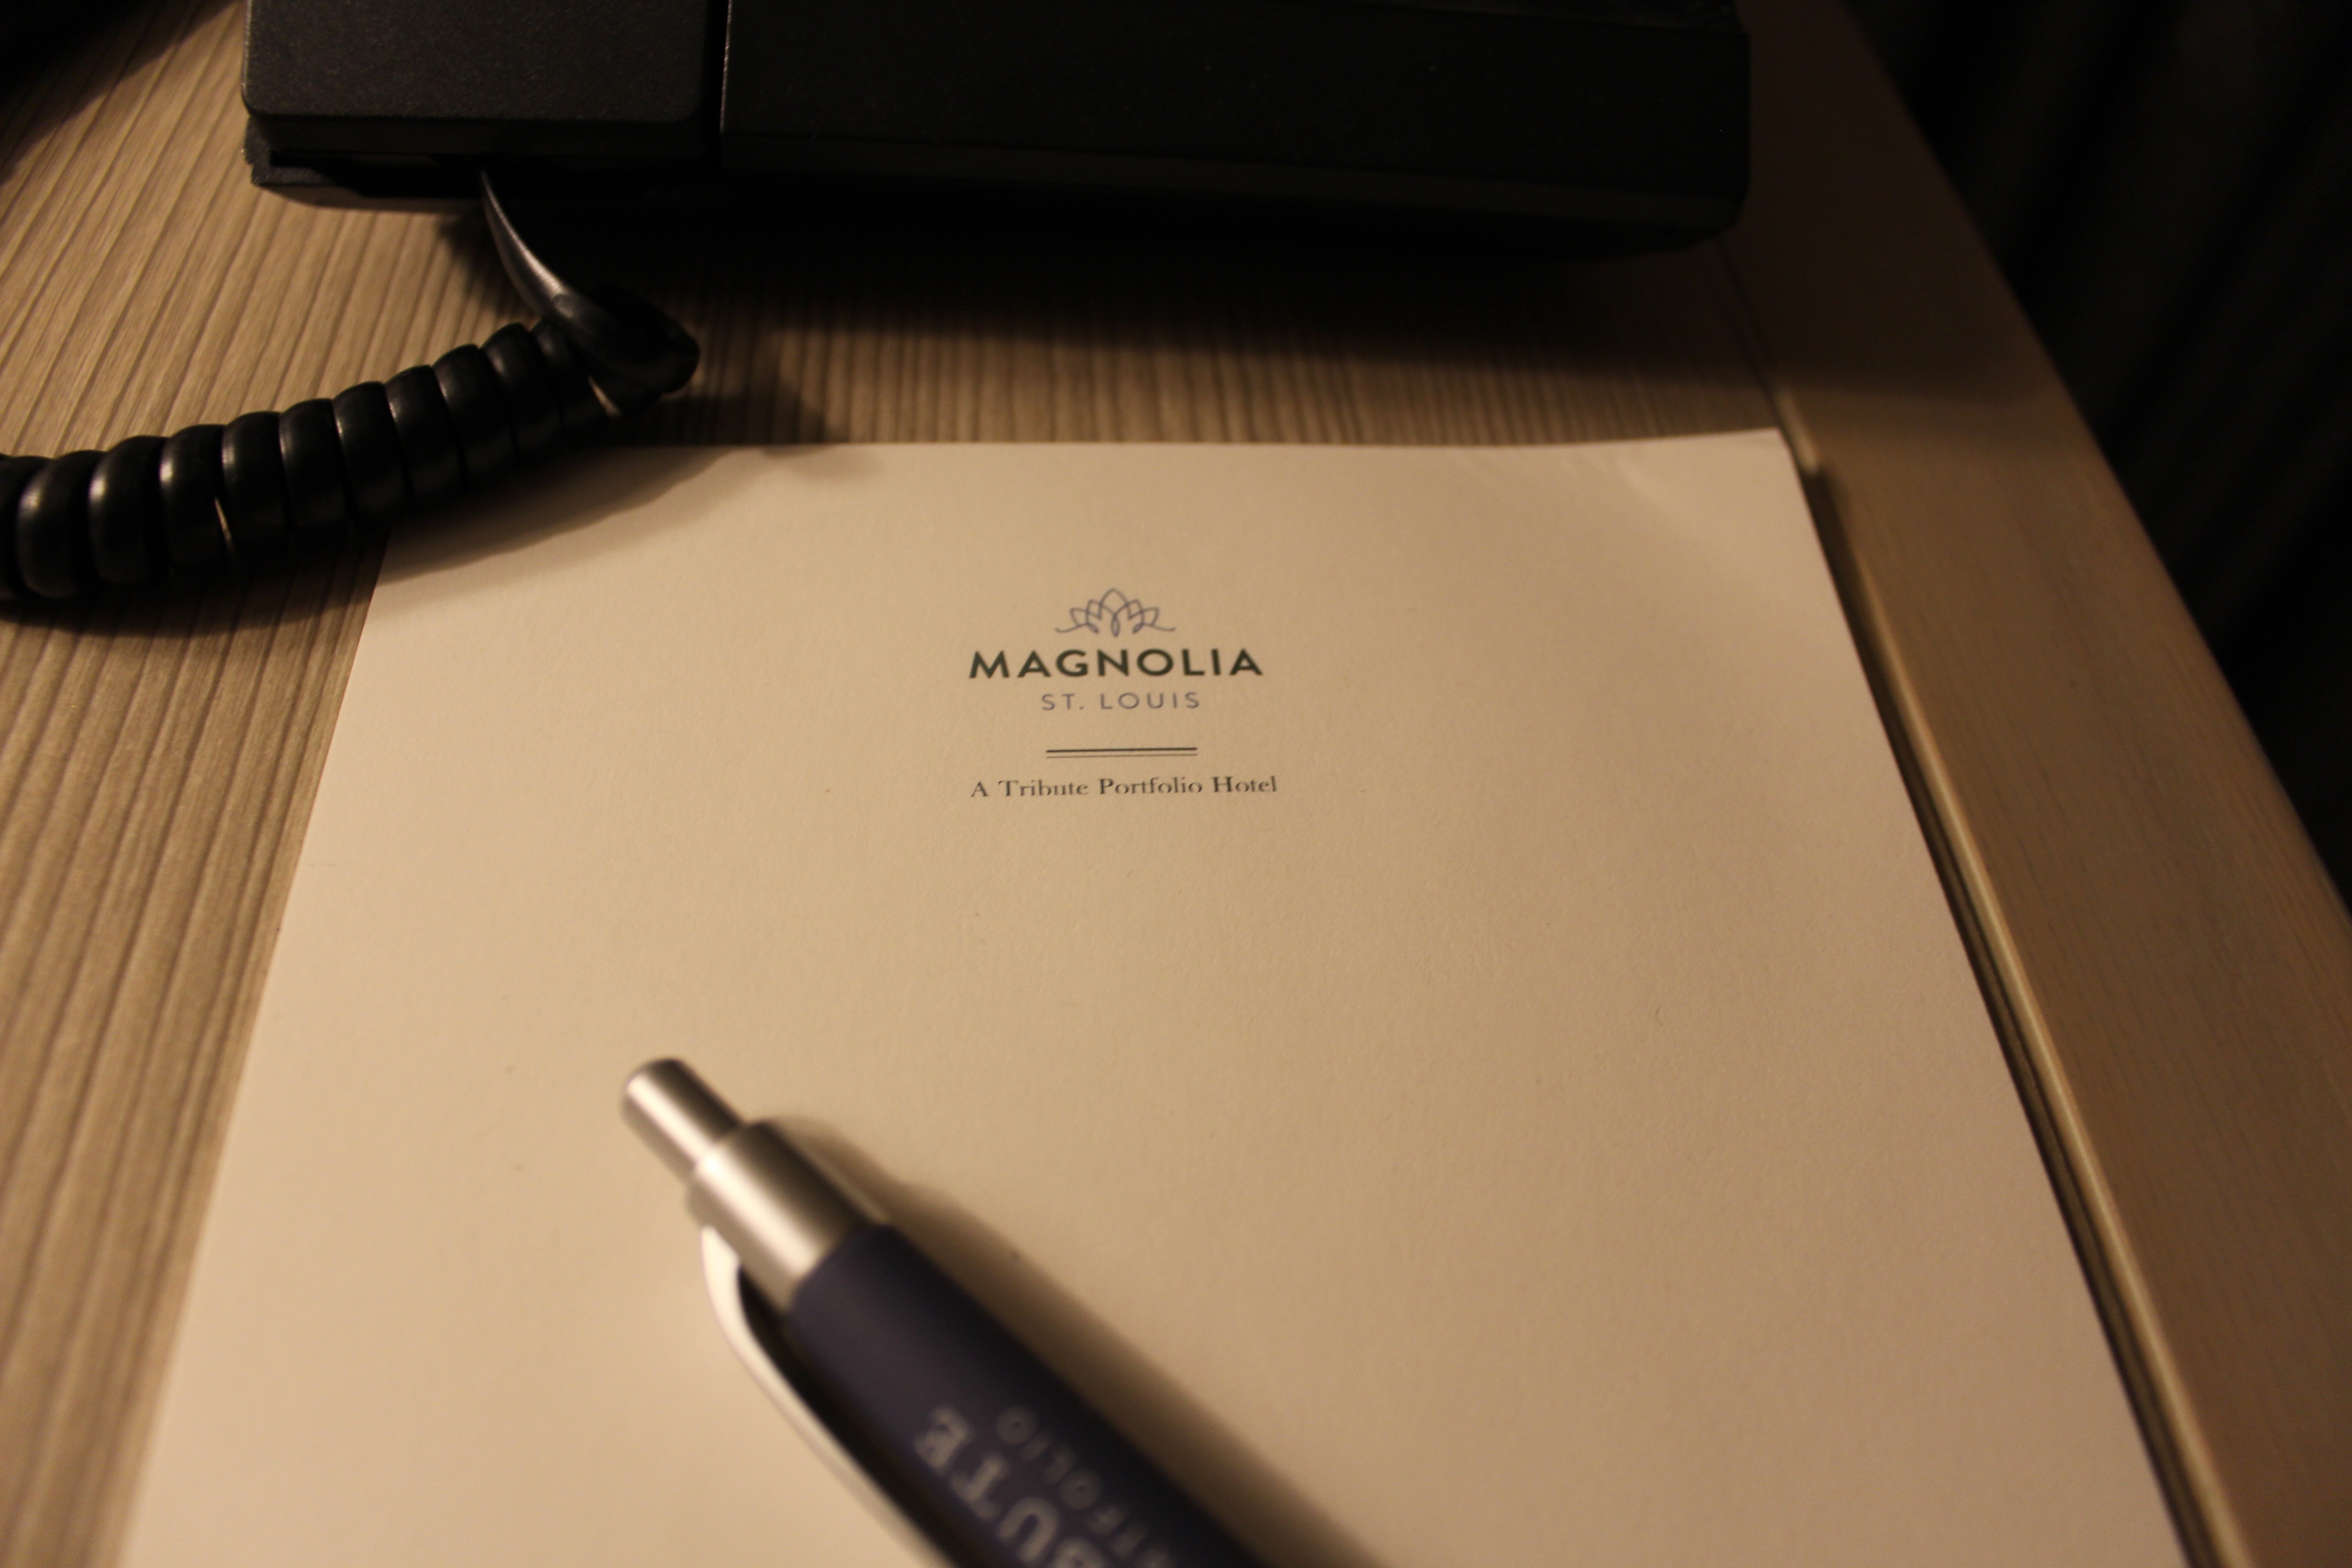 The Magnolia, an SPG Tribute Property